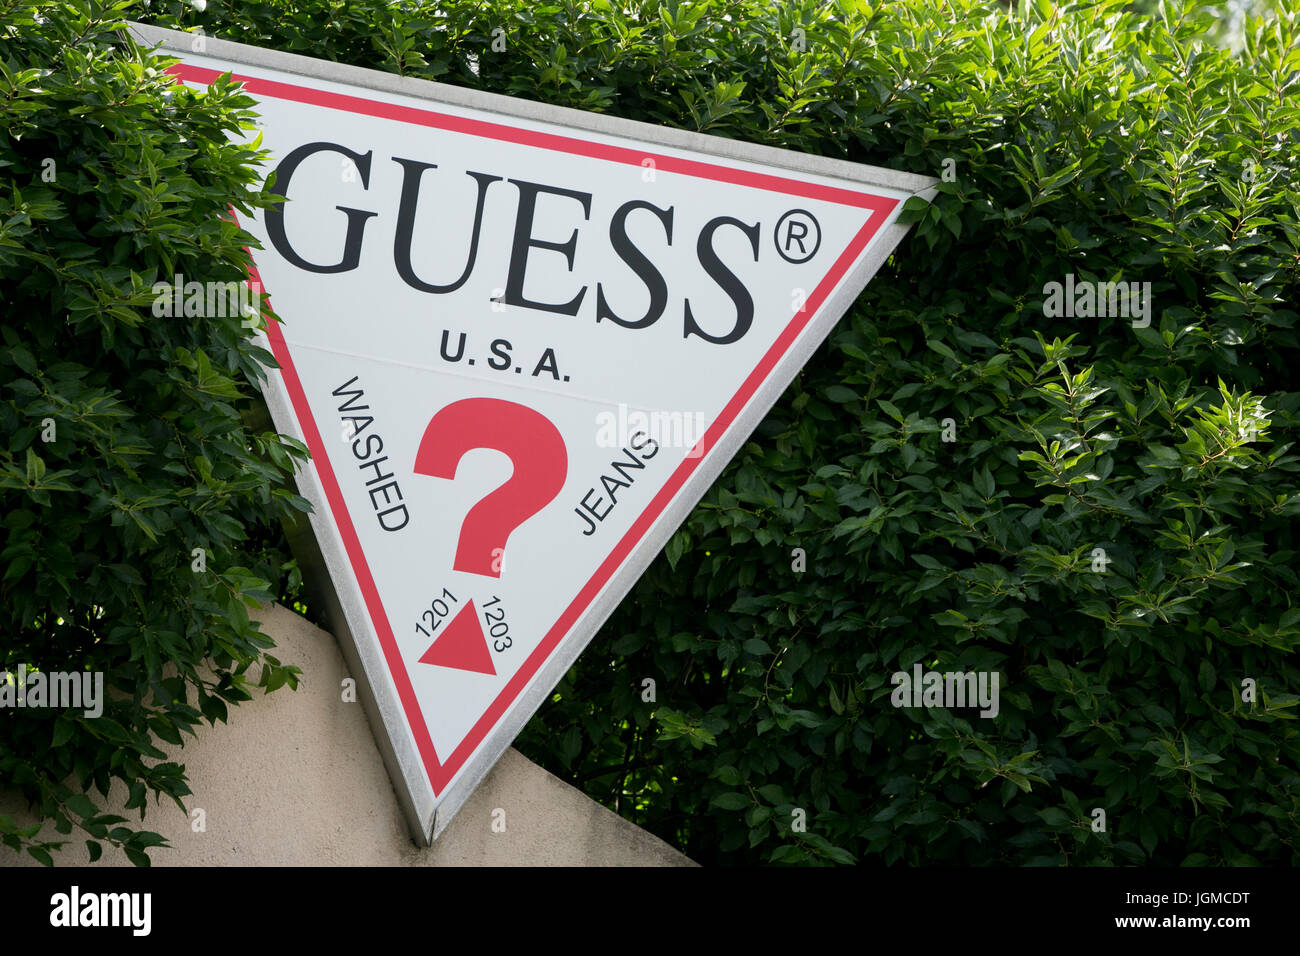 A logo sign outside of facility occupied Guess, Inc., in Louisville, Kentucky on July 1, 2017 Photo - Alamy